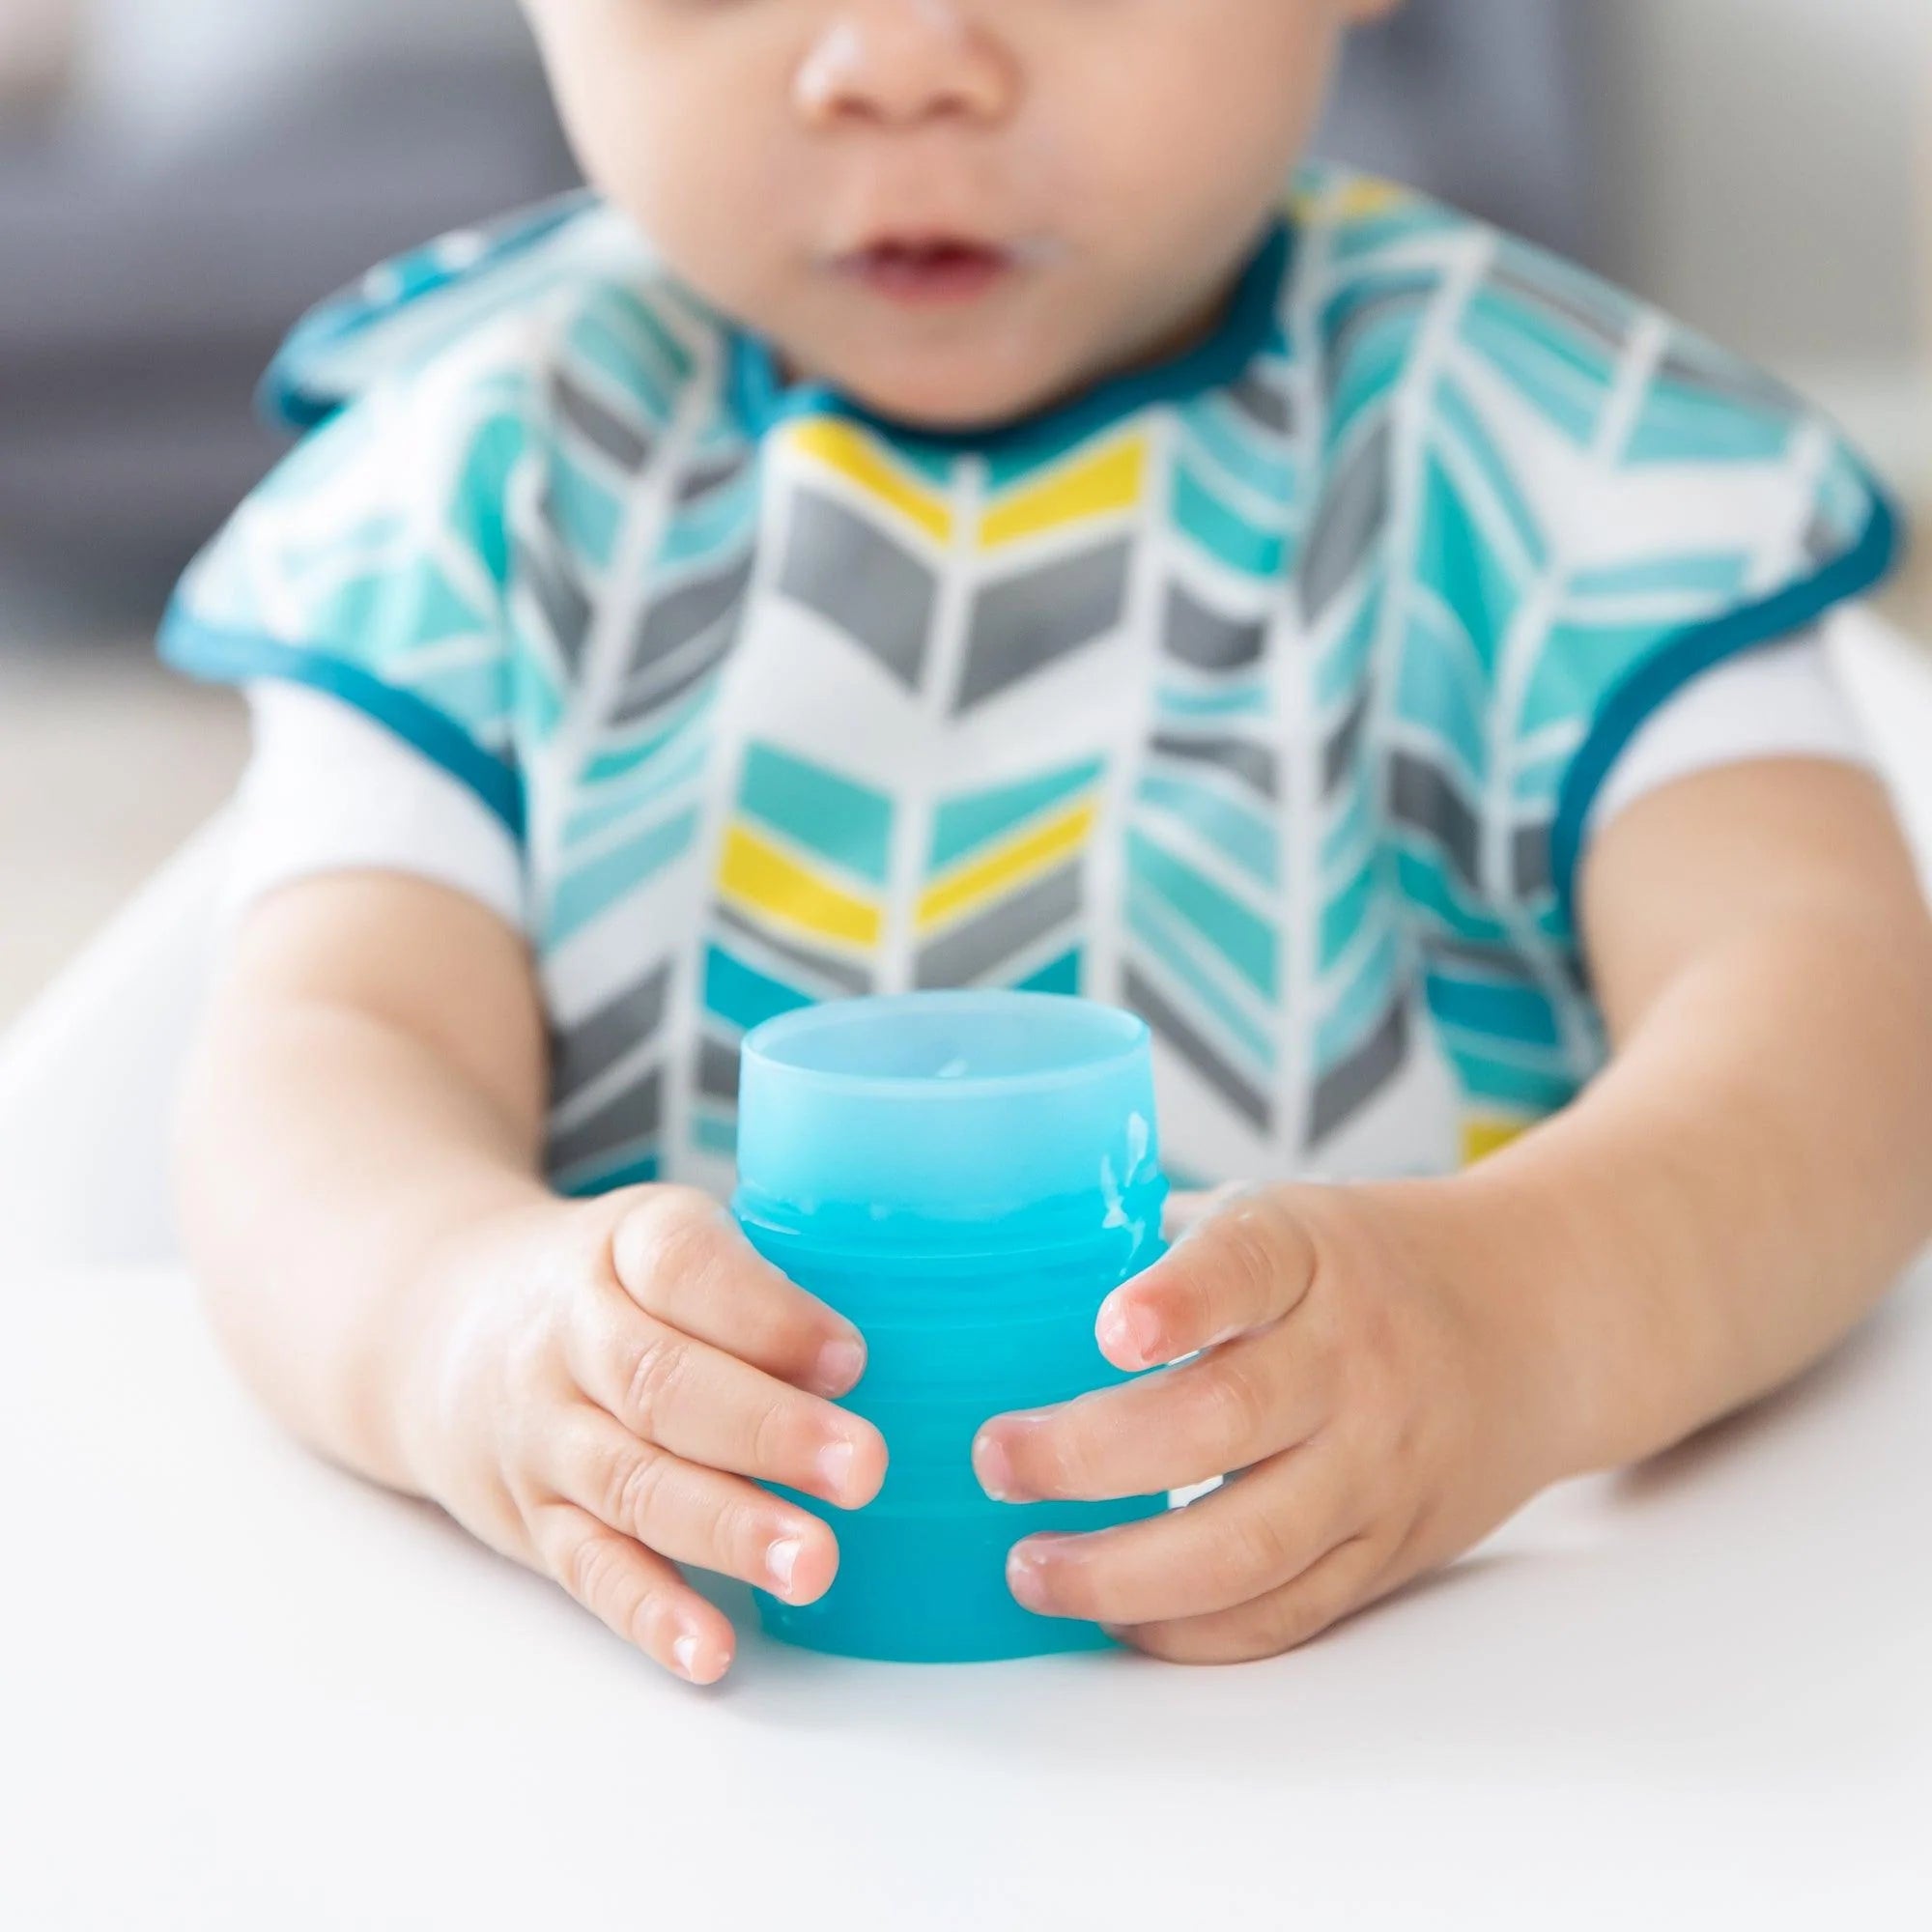 Premium Open Cup and Reusable Silicone Straws for Toddler